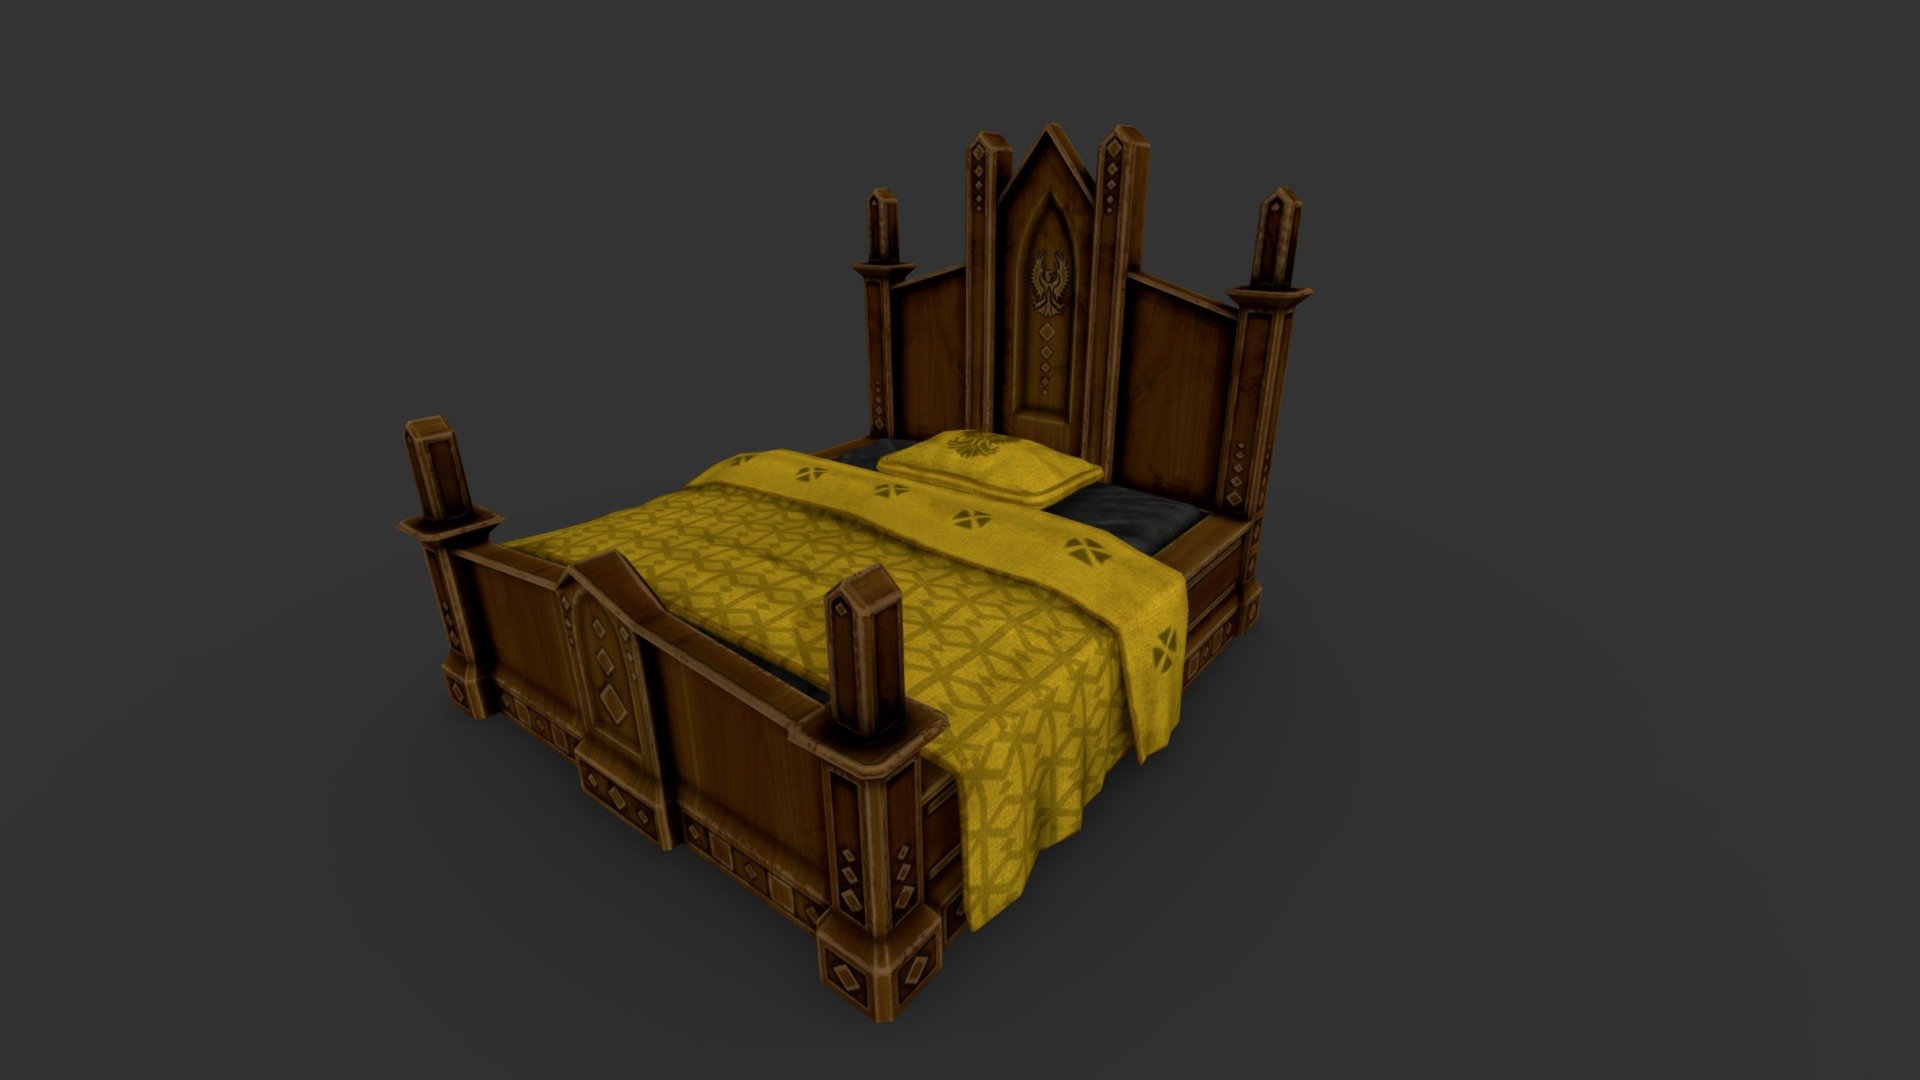 A bed that I made for Beyond Skyrim Cyrodiil: Seat of Sundered Kings some time ago. Here it has the Bruma colors on it. Check out the project here: http://www.darkcreations.org/projects/12-beyond-skyrim/ - Bruma Noble Bed - 3D model by kelretu 3d model